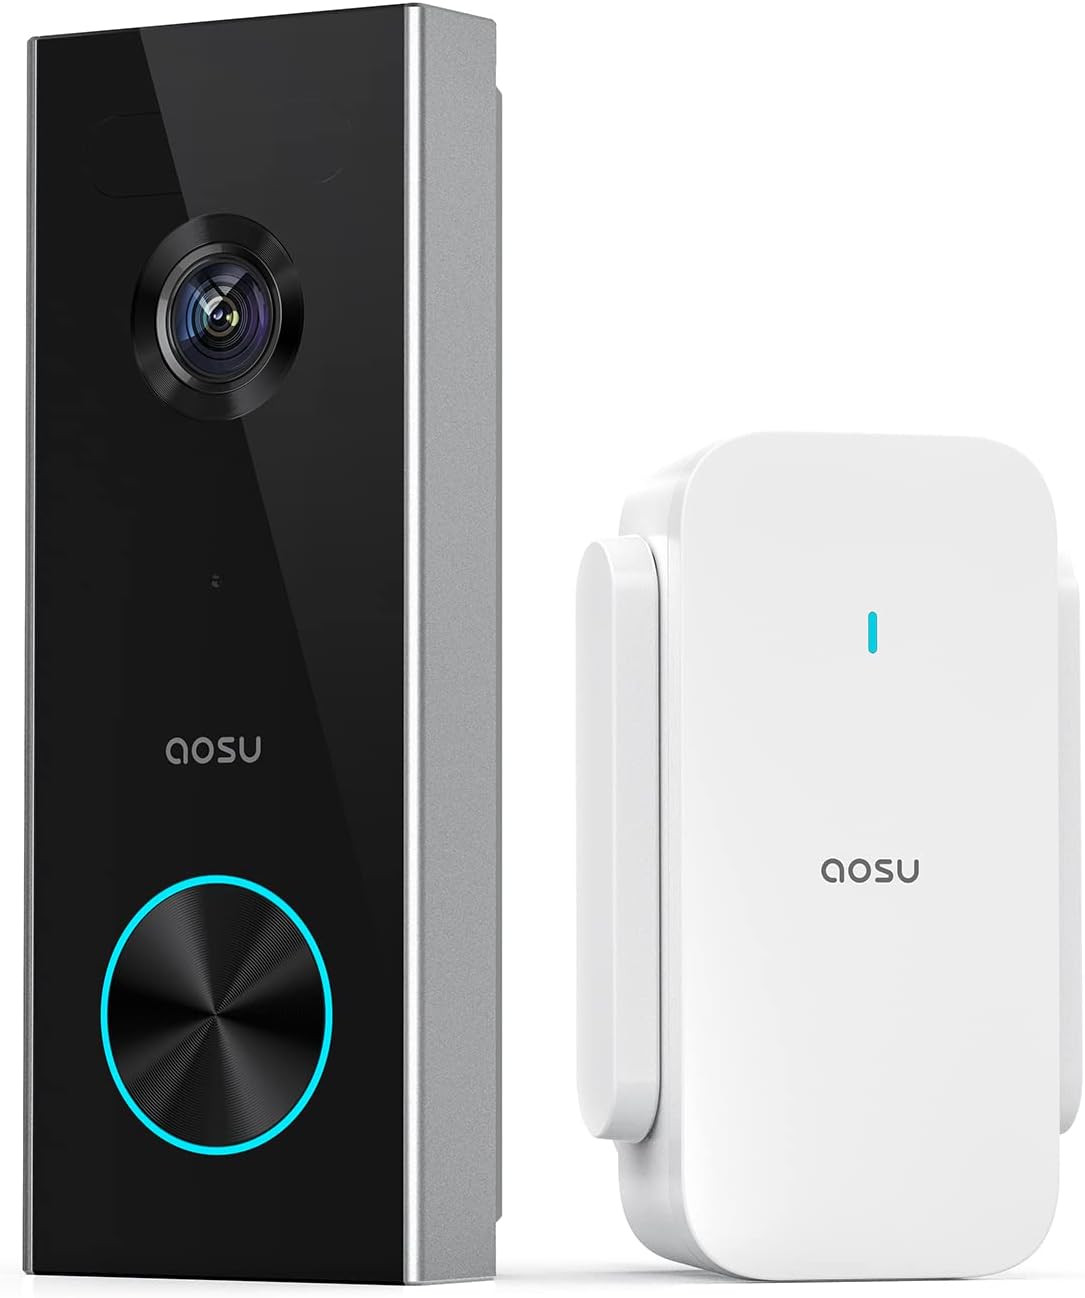 AOSU Wireless Doorbell Camera, Battery-Powered Video Doorbell with Chime, 2K Resolution, No Monthly Fees, 2.4GHz WiFi, 180-Day Battery Life, AI Detection, Work with Alexa & Google Assistant